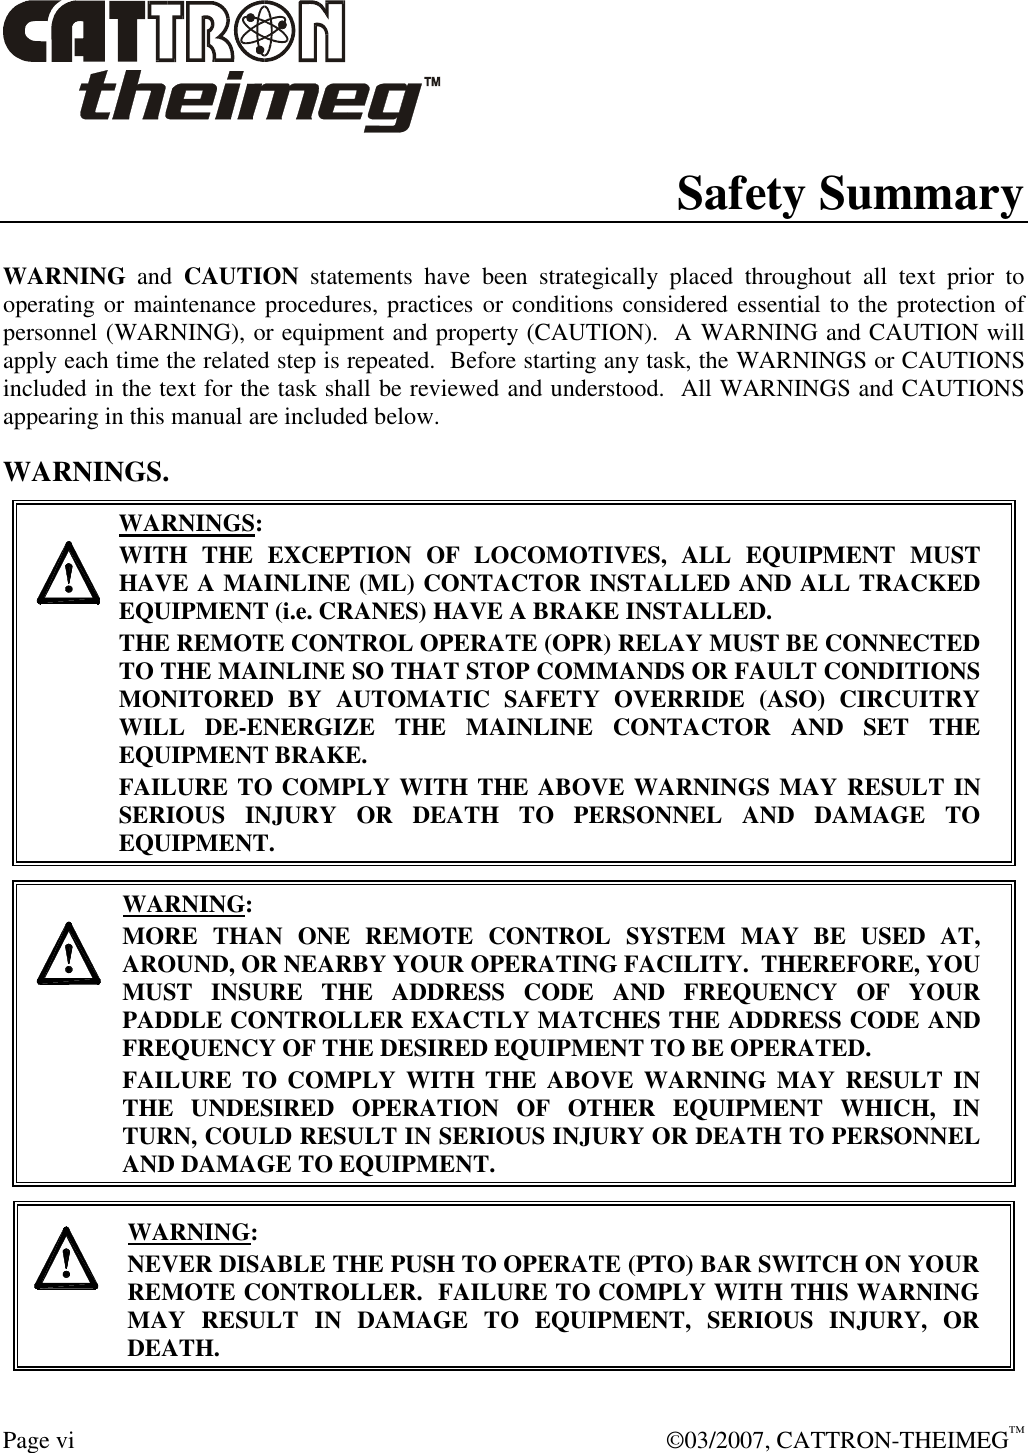  Page vi    ©03/2007, CATTRON-THEIMEG™ Safety Summary  WARNING  and  CAUTION  statements  have  been  strategically  placed  throughout  all  text  prior  to operating or maintenance procedures, practices or conditions considered essential to the protection of personnel (WARNING), or equipment and property (CAUTION).  A WARNING and CAUTION will apply each time the related step is repeated.  Before starting any task, the WARNINGS or CAUTIONS included in the text for the task shall be reviewed and understood.  All WARNINGS and CAUTIONS appearing in this manual are included below. WARNINGS.     WARNINGS: WITH  THE  EXCEPTION  OF  LOCOMOTIVES,  ALL  EQUIPMENT  MUST HAVE A MAINLINE (ML) CONTACTOR INSTALLED AND ALL TRACKED EQUIPMENT (i.e. CRANES) HAVE A BRAKE INSTALLED. THE REMOTE CONTROL OPERATE (OPR) RELAY MUST BE CONNECTED TO THE MAINLINE SO THAT STOP COMMANDS OR FAULT CONDITIONS MONITORED  BY  AUTOMATIC  SAFETY  OVERRIDE  (ASO)  CIRCUITRY WILL  DE-ENERGIZE  THE  MAINLINE  CONTACTOR  AND  SET  THE EQUIPMENT BRAKE.  FAILURE TO COMPLY WITH THE ABOVE WARNINGS MAY RESULT IN SERIOUS  INJURY  OR  DEATH  TO  PERSONNEL  AND  DAMAGE  TO EQUIPMENT.       WARNING: MORE  THAN  ONE  REMOTE  CONTROL  SYSTEM  MAY  BE  USED  AT, AROUND, OR NEARBY YOUR OPERATING FACILITY.  THEREFORE, YOU MUST  INSURE  THE  ADDRESS  CODE  AND  FREQUENCY  OF  YOUR PADDLE CONTROLLER EXACTLY MATCHES THE ADDRESS CODE AND FREQUENCY OF THE DESIRED EQUIPMENT TO BE OPERATED. FAILURE  TO  COMPLY  WITH  THE  ABOVE  WARNING MAY  RESULT  IN THE  UNDESIRED  OPERATION  OF  OTHER  EQUIPMENT  WHICH,  IN TURN, COULD RESULT IN SERIOUS INJURY OR DEATH TO PERSONNEL AND DAMAGE TO EQUIPMENT.      WARNING: NEVER DISABLE THE PUSH TO OPERATE (PTO) BAR SWITCH ON YOUR REMOTE CONTROLLER.  FAILURE TO COMPLY WITH THIS WARNING MAY  RESULT  IN  DAMAGE  TO  EQUIPMENT,  SERIOUS  INJURY,  OR DEATH.   